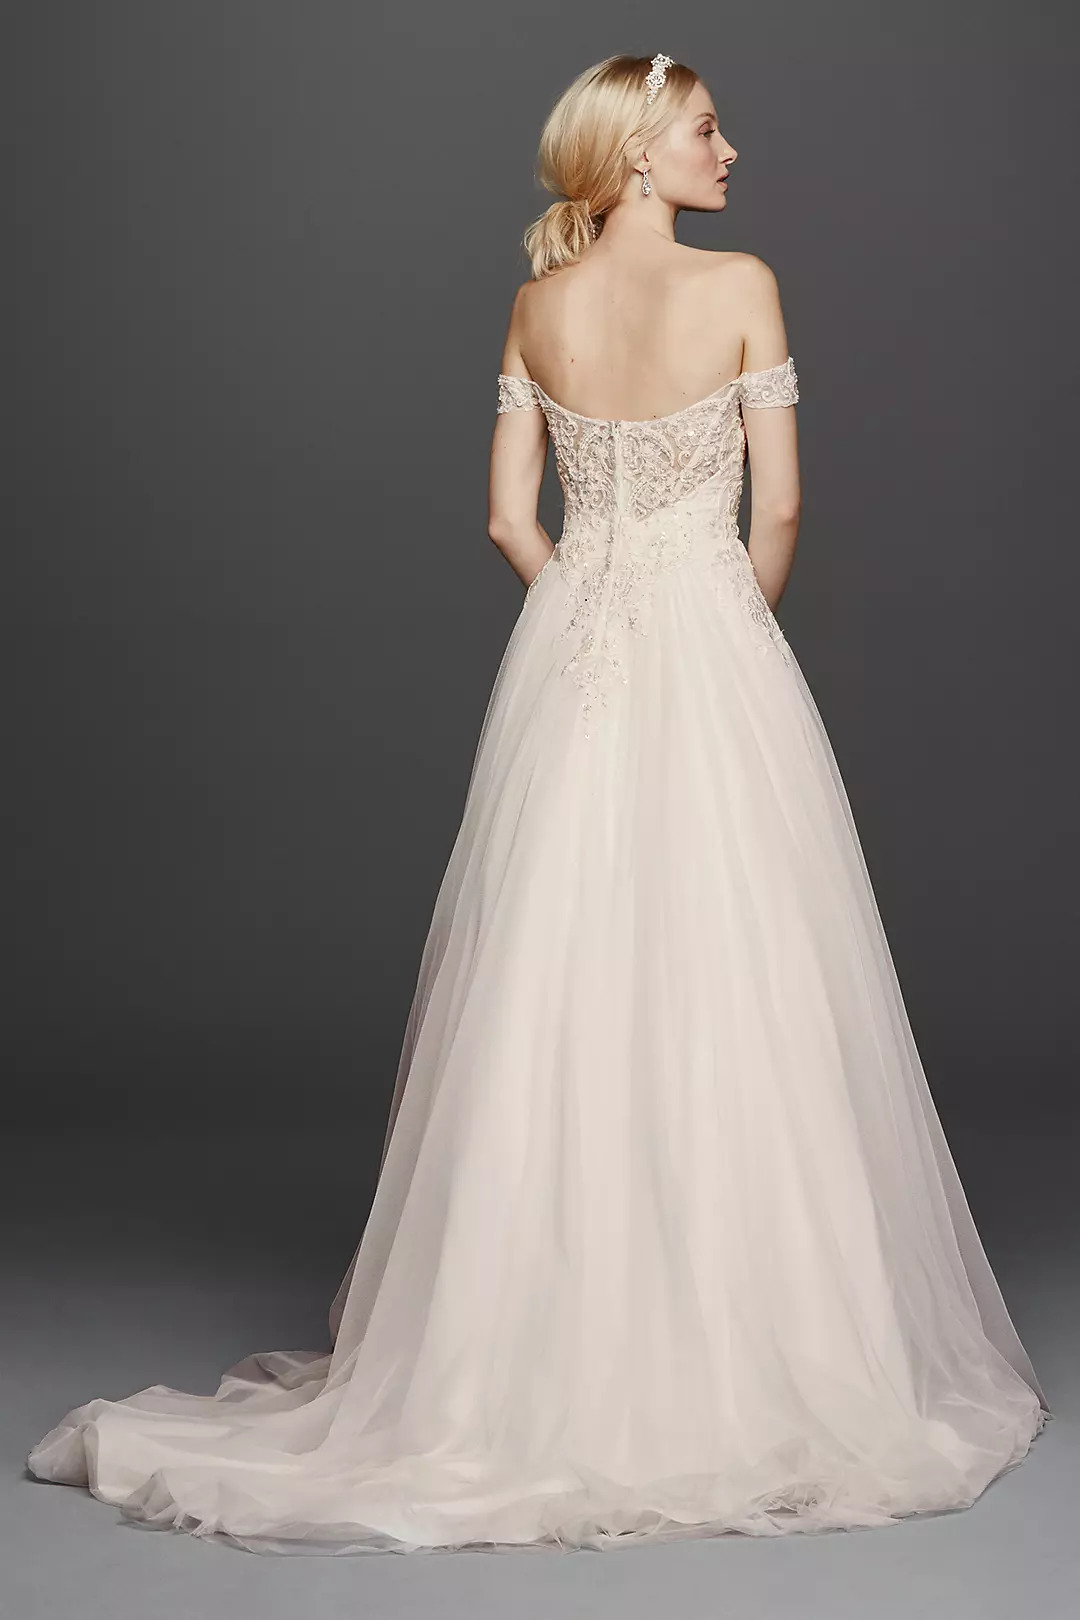 As-Is Off the Shoulder Swag Sleeved Wedding Dress Image 2